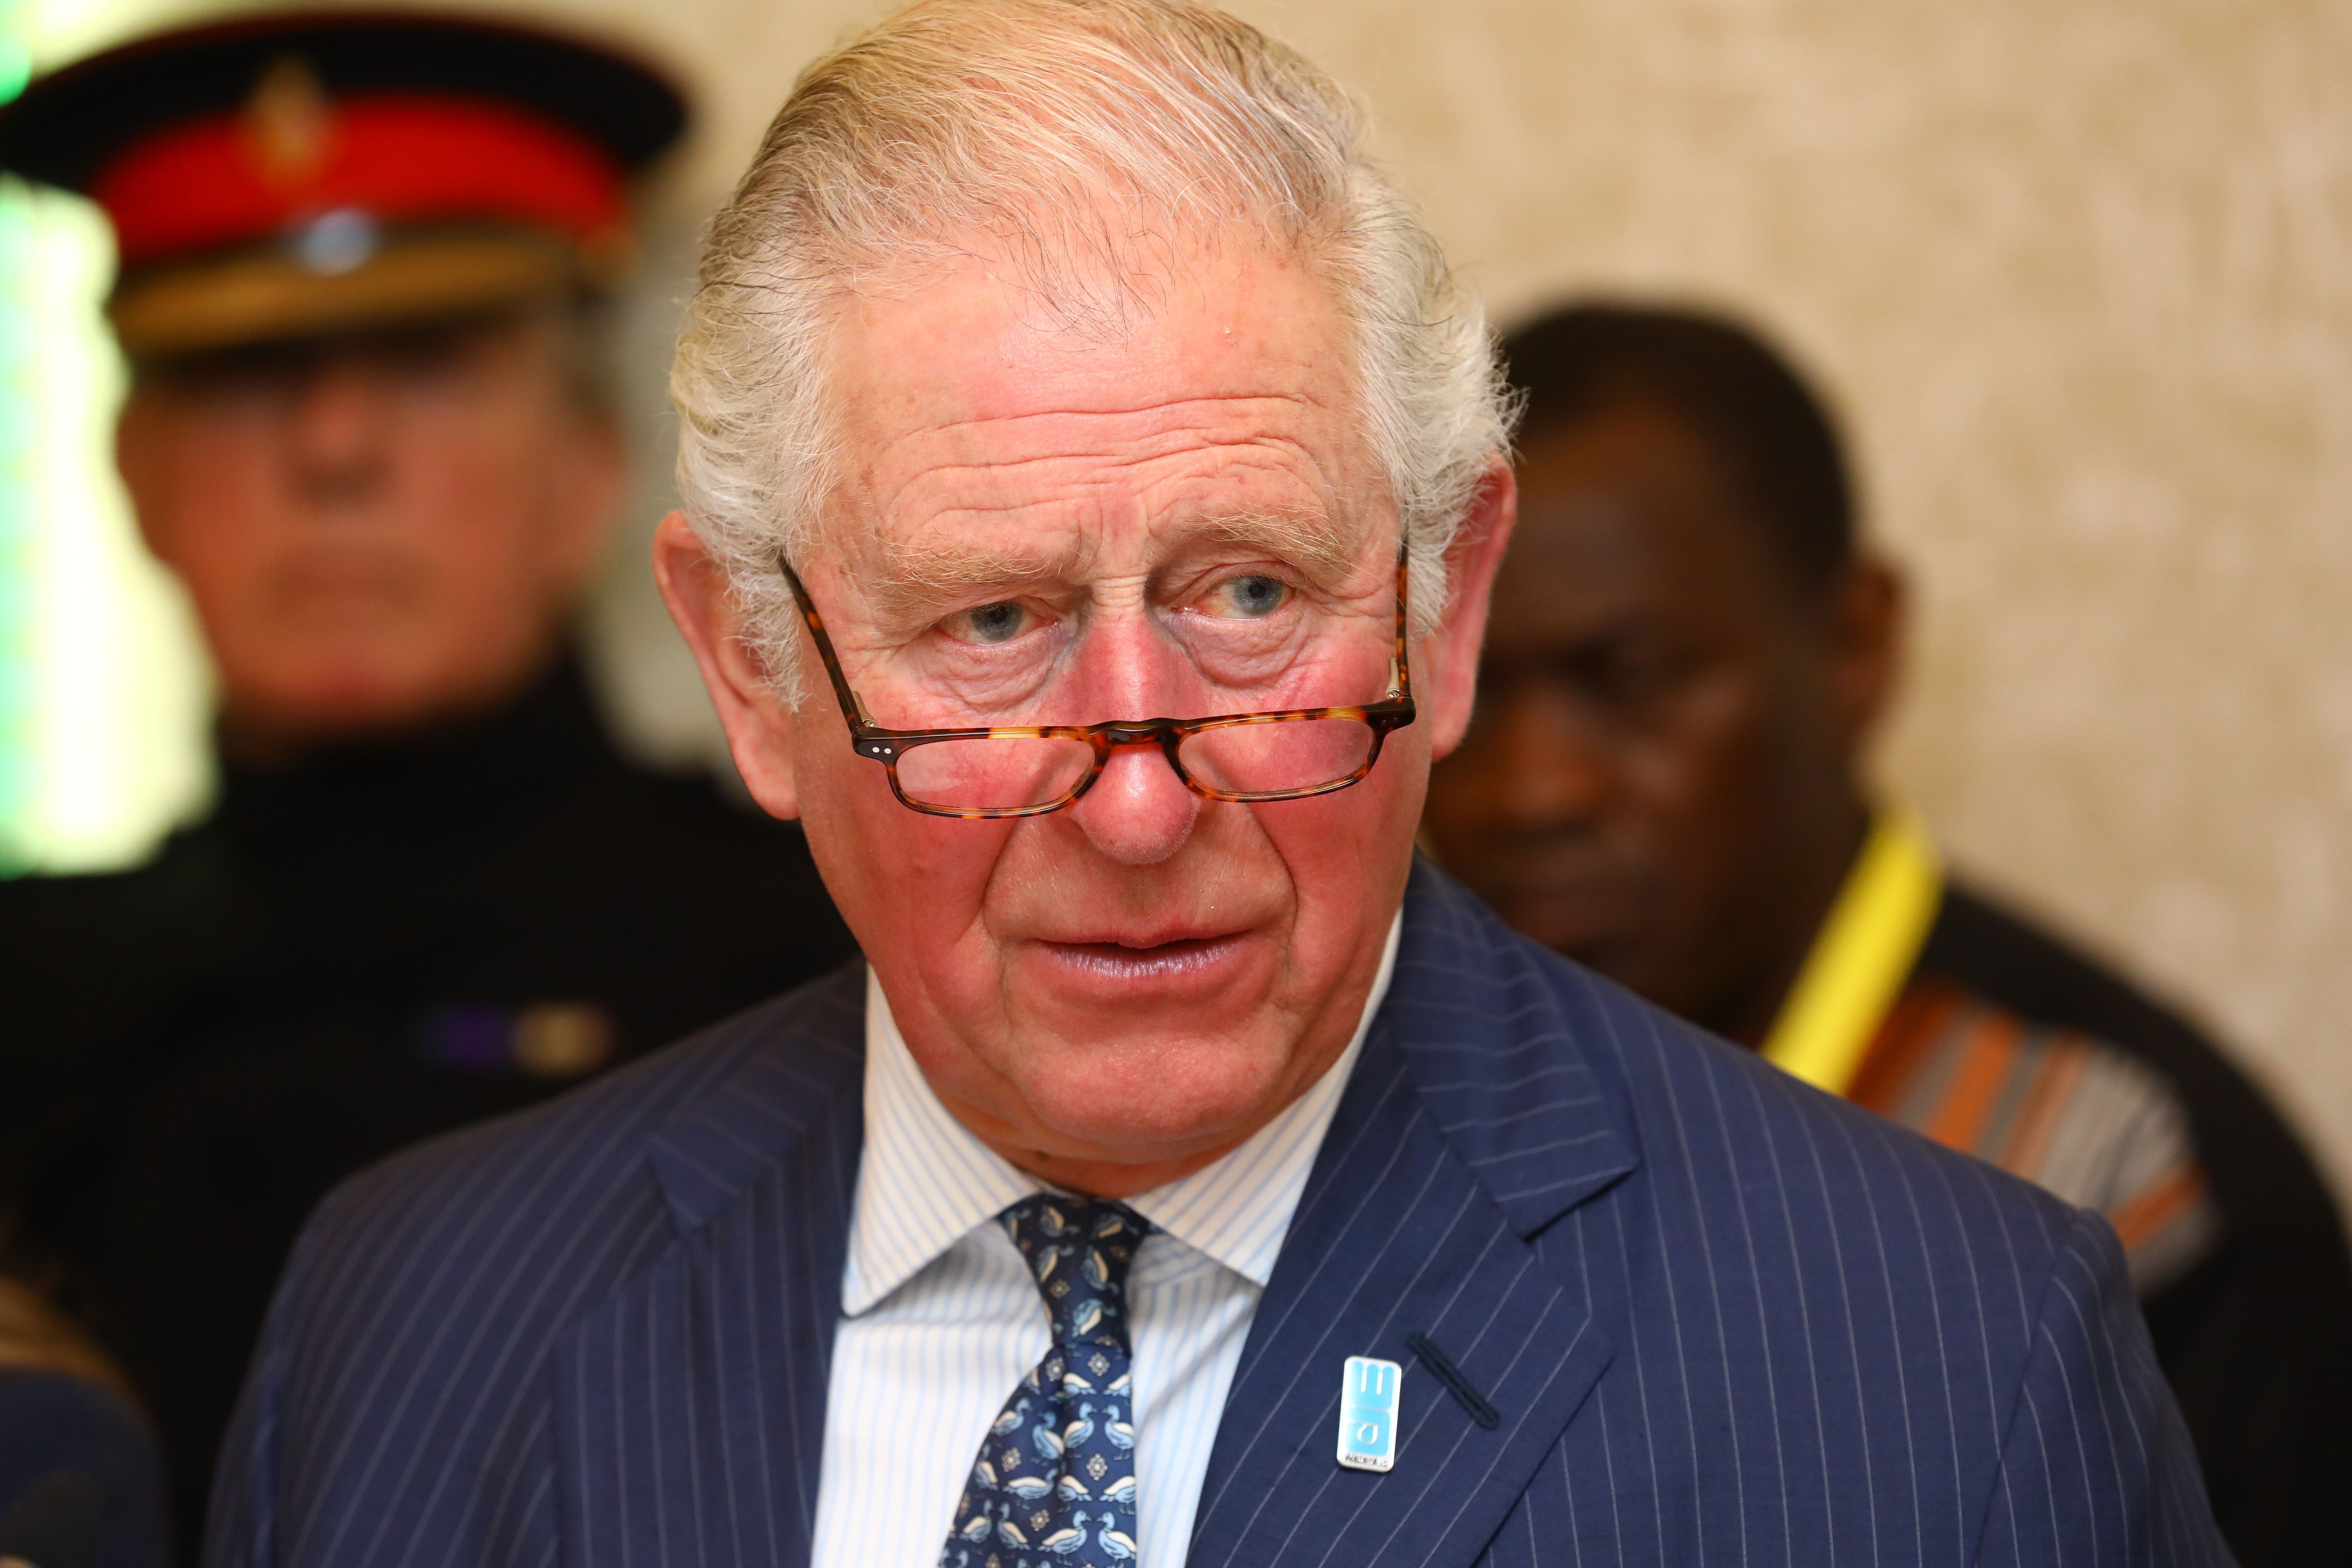 King Charles attends the WaterAid water and climate event at Kings Place on March 10, 2020, in London, England. The Prince of Wales has been President of WaterAid since 1991. | Source: Getty Images